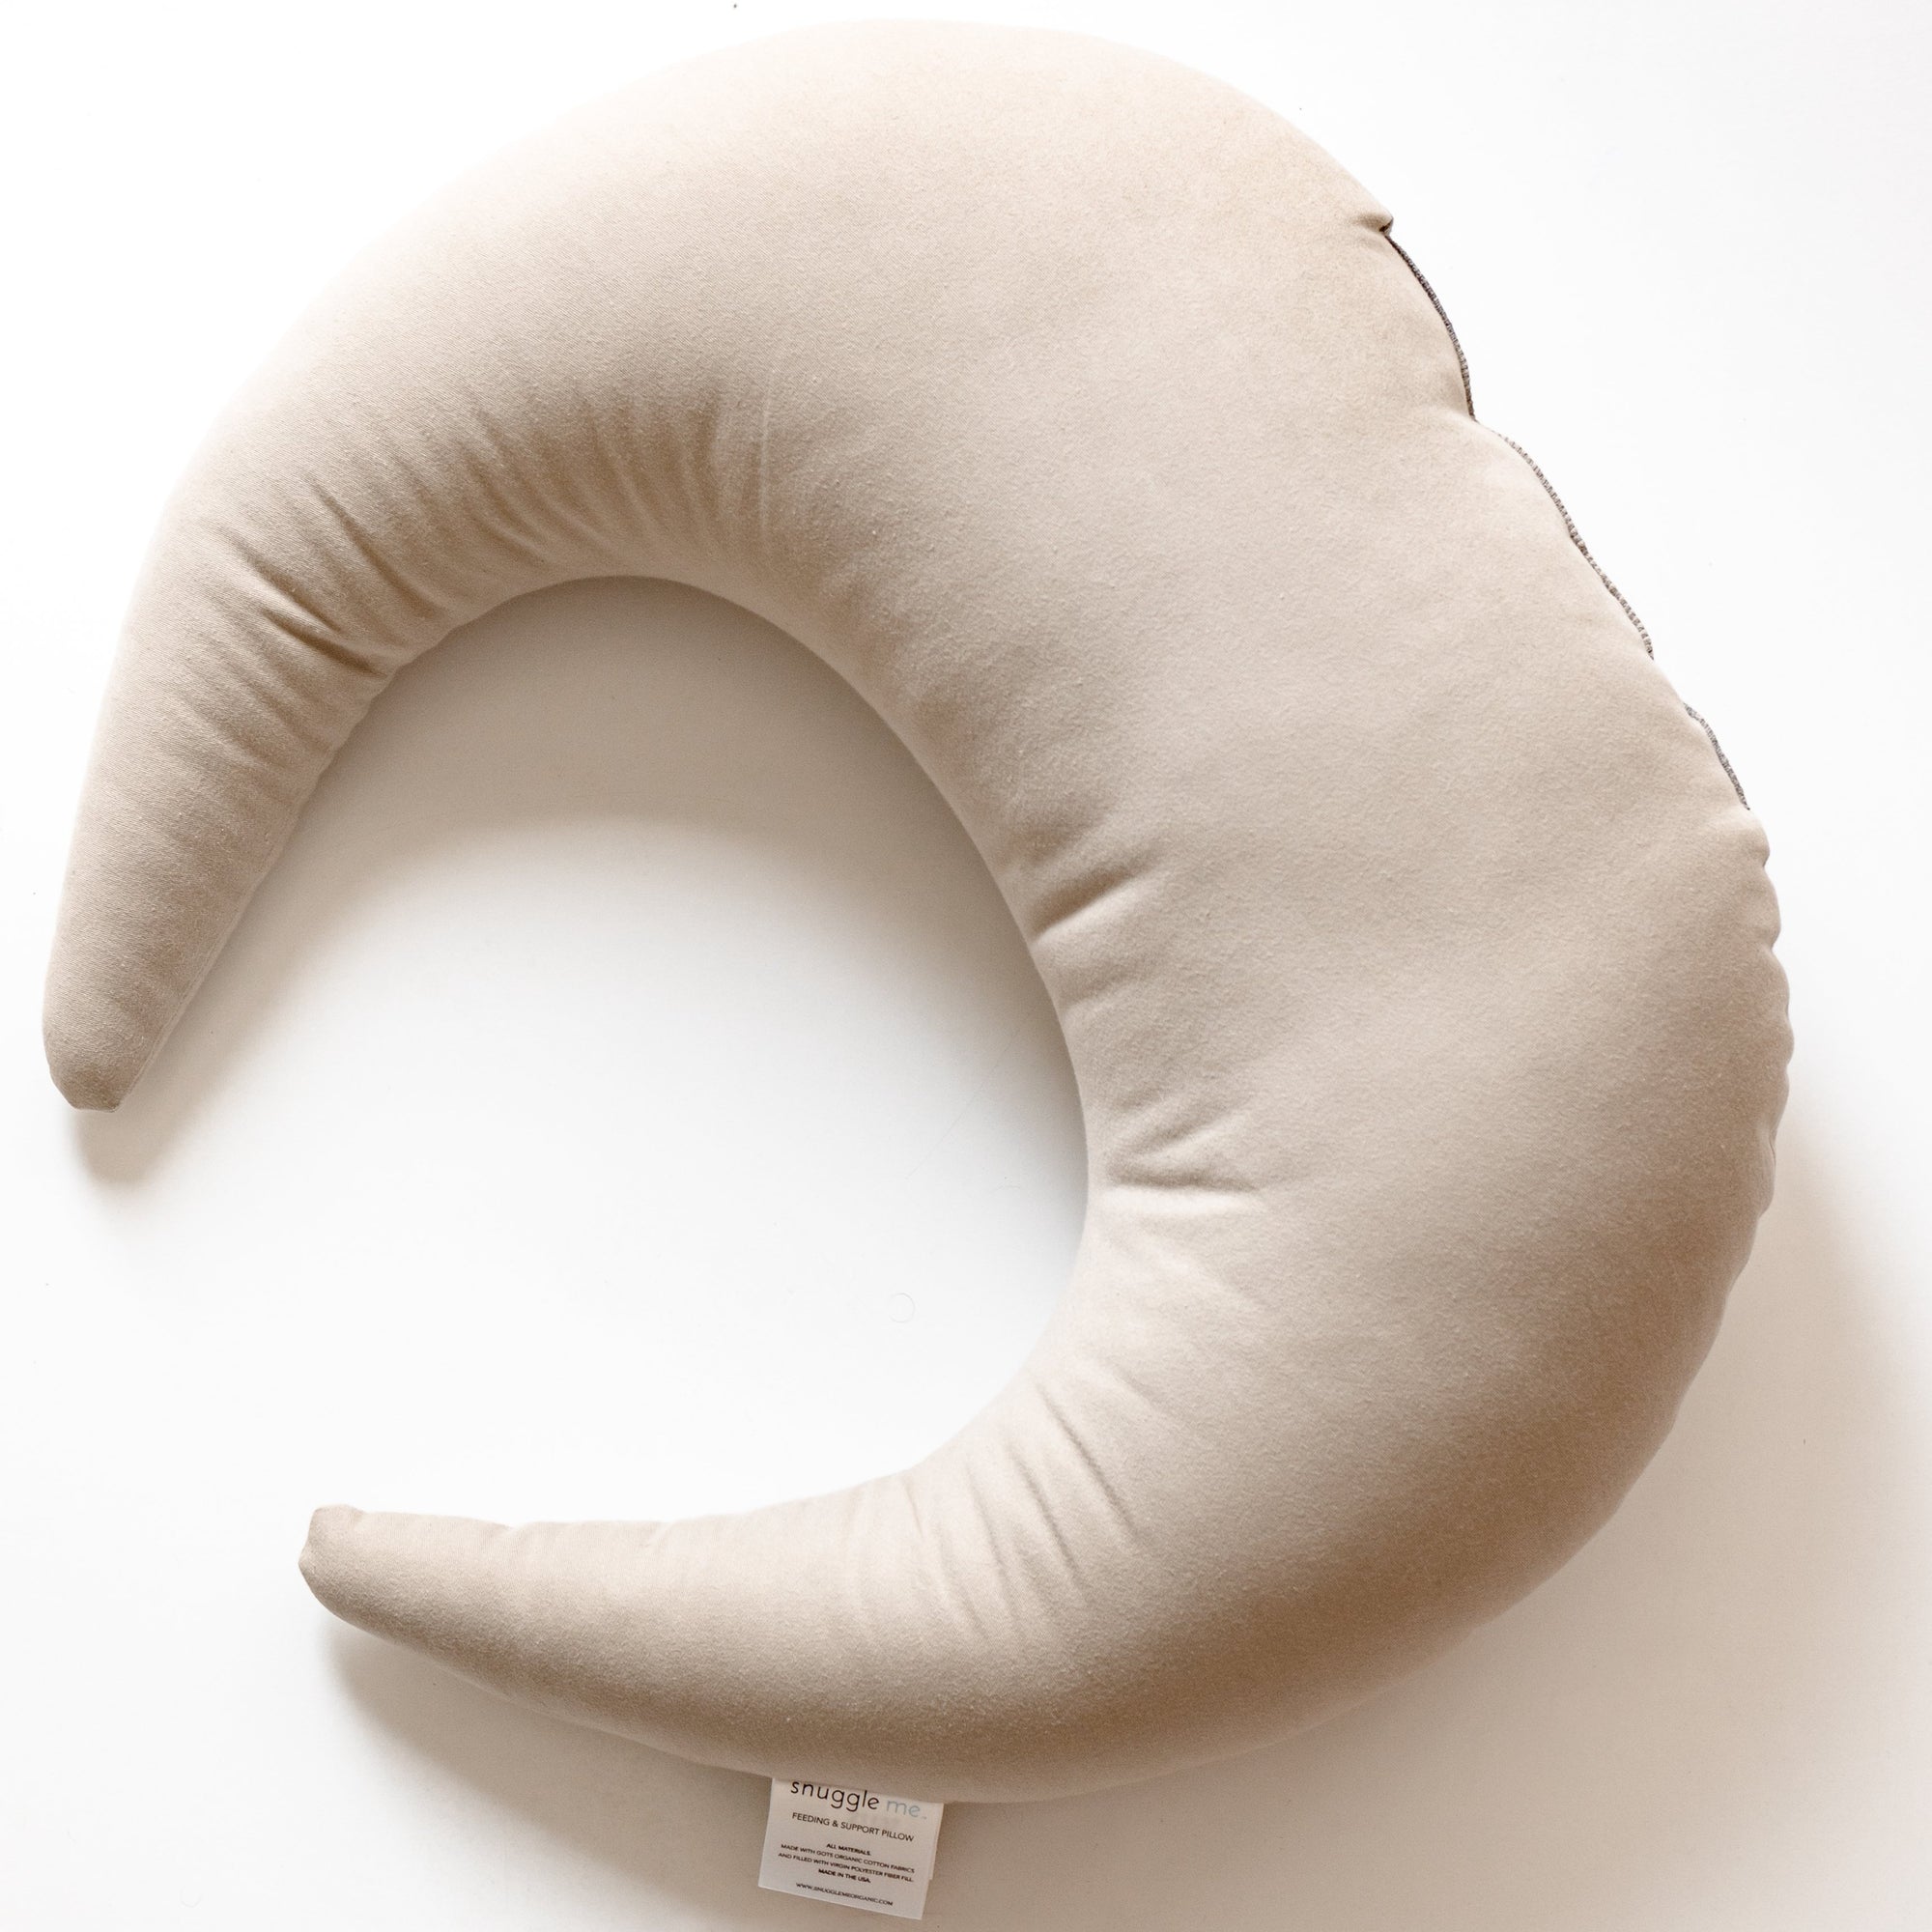 An image of Snuggle Me Feeding + Support Pillow in the shade Birch.